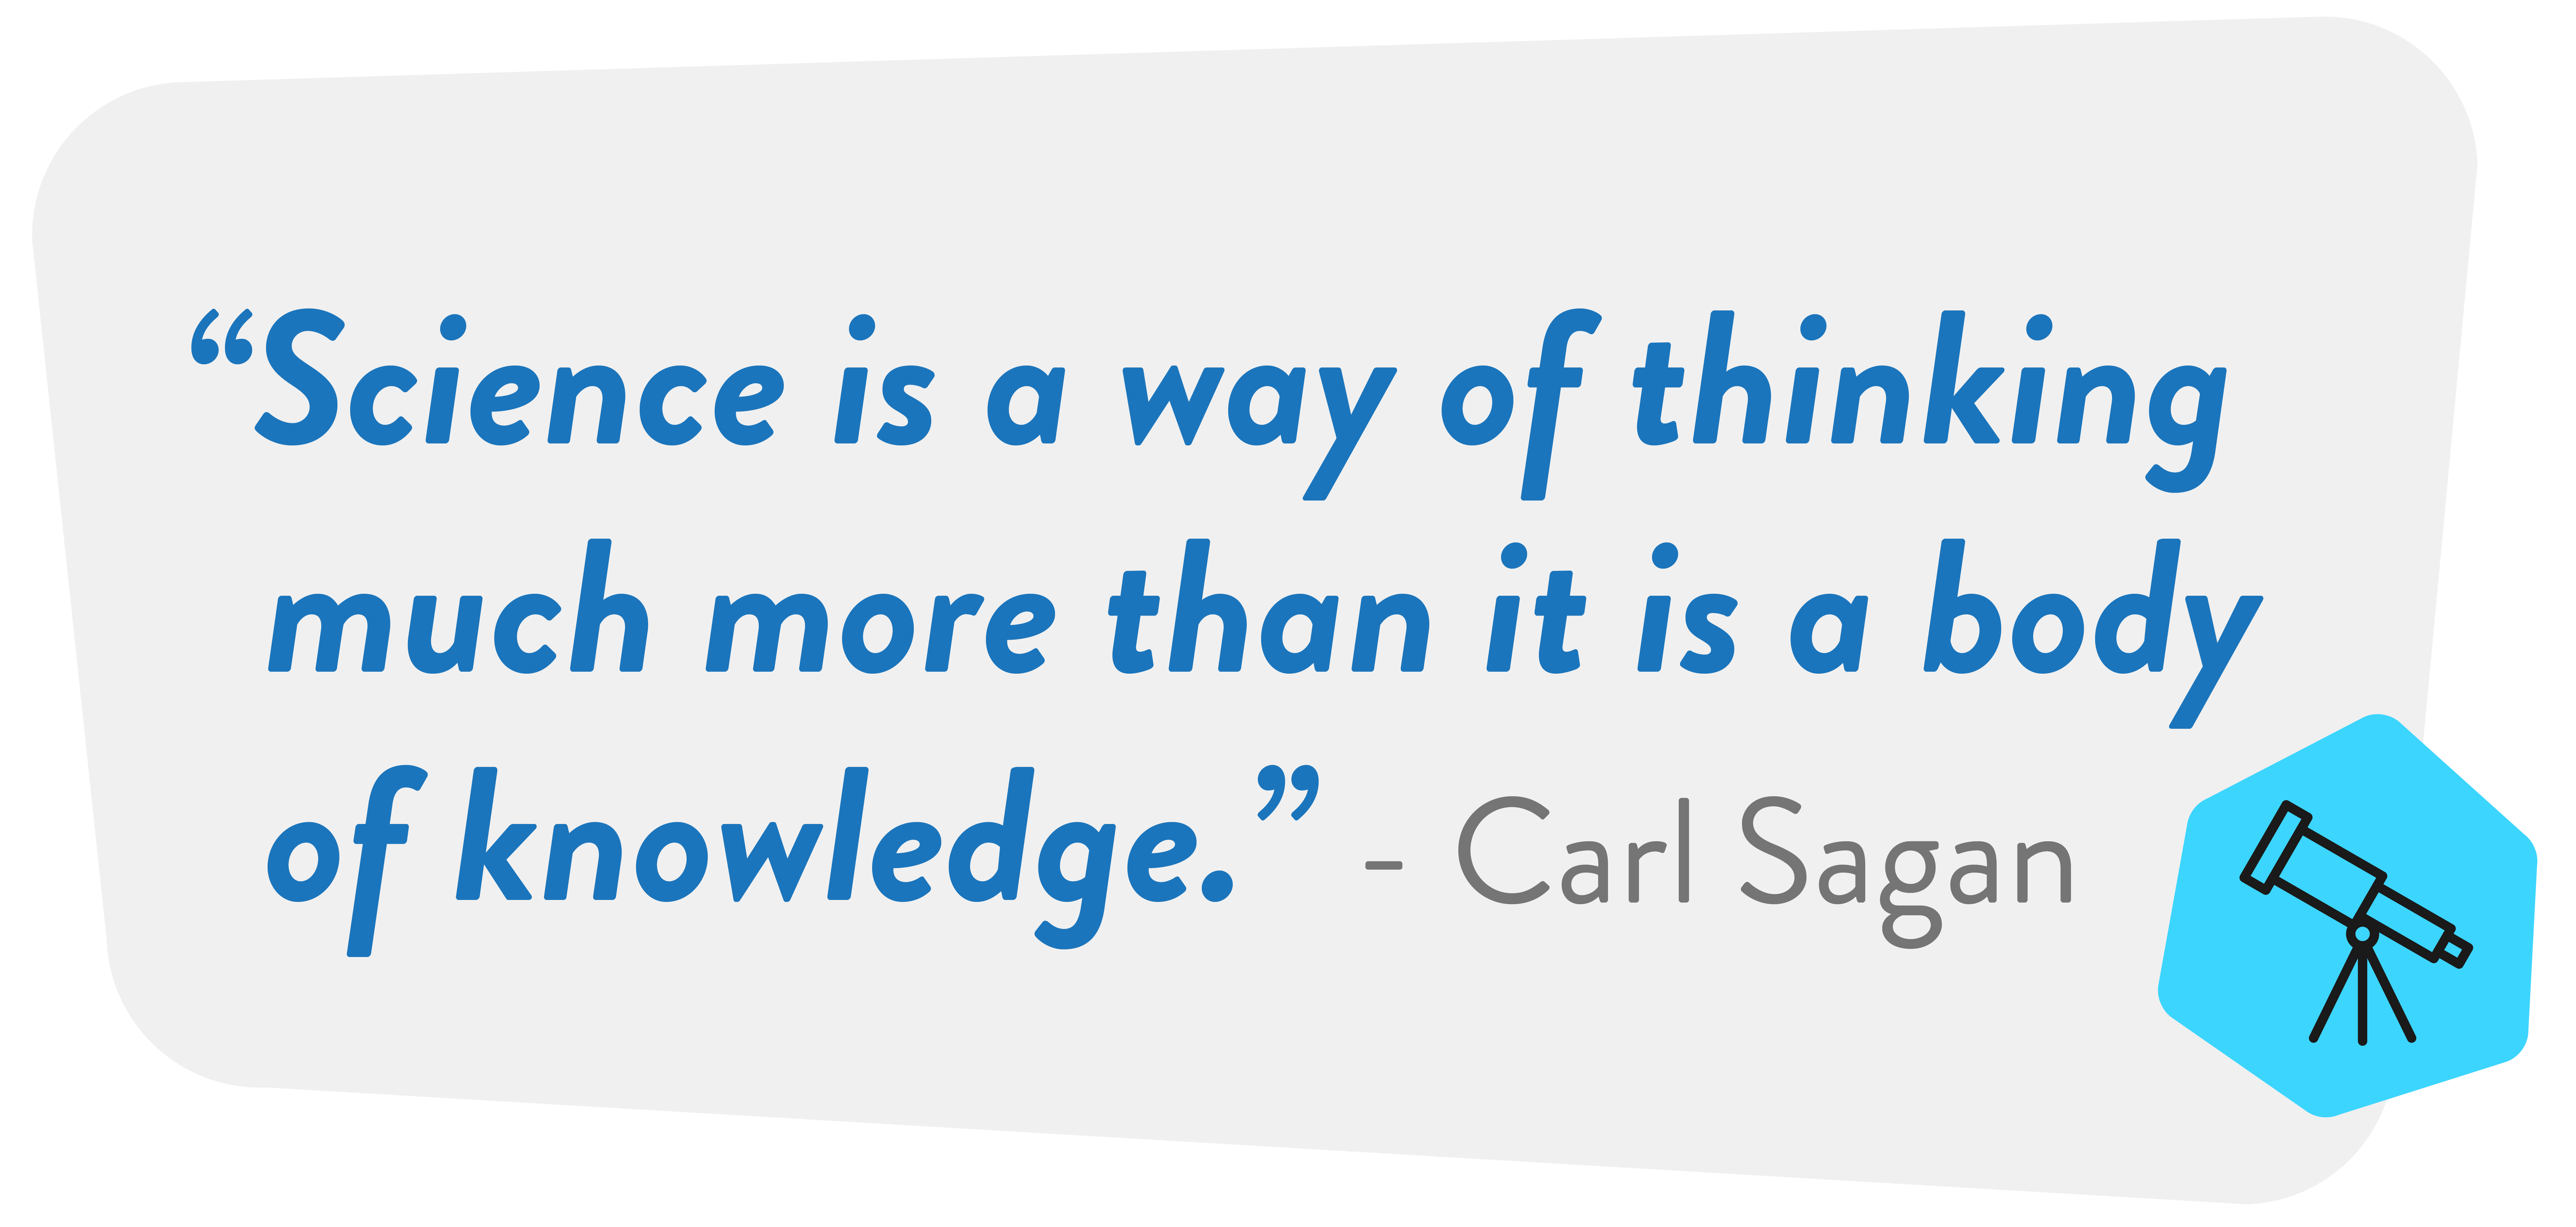 Science is a way of thinking much more than it is a body of knowledge - Carl Sagan